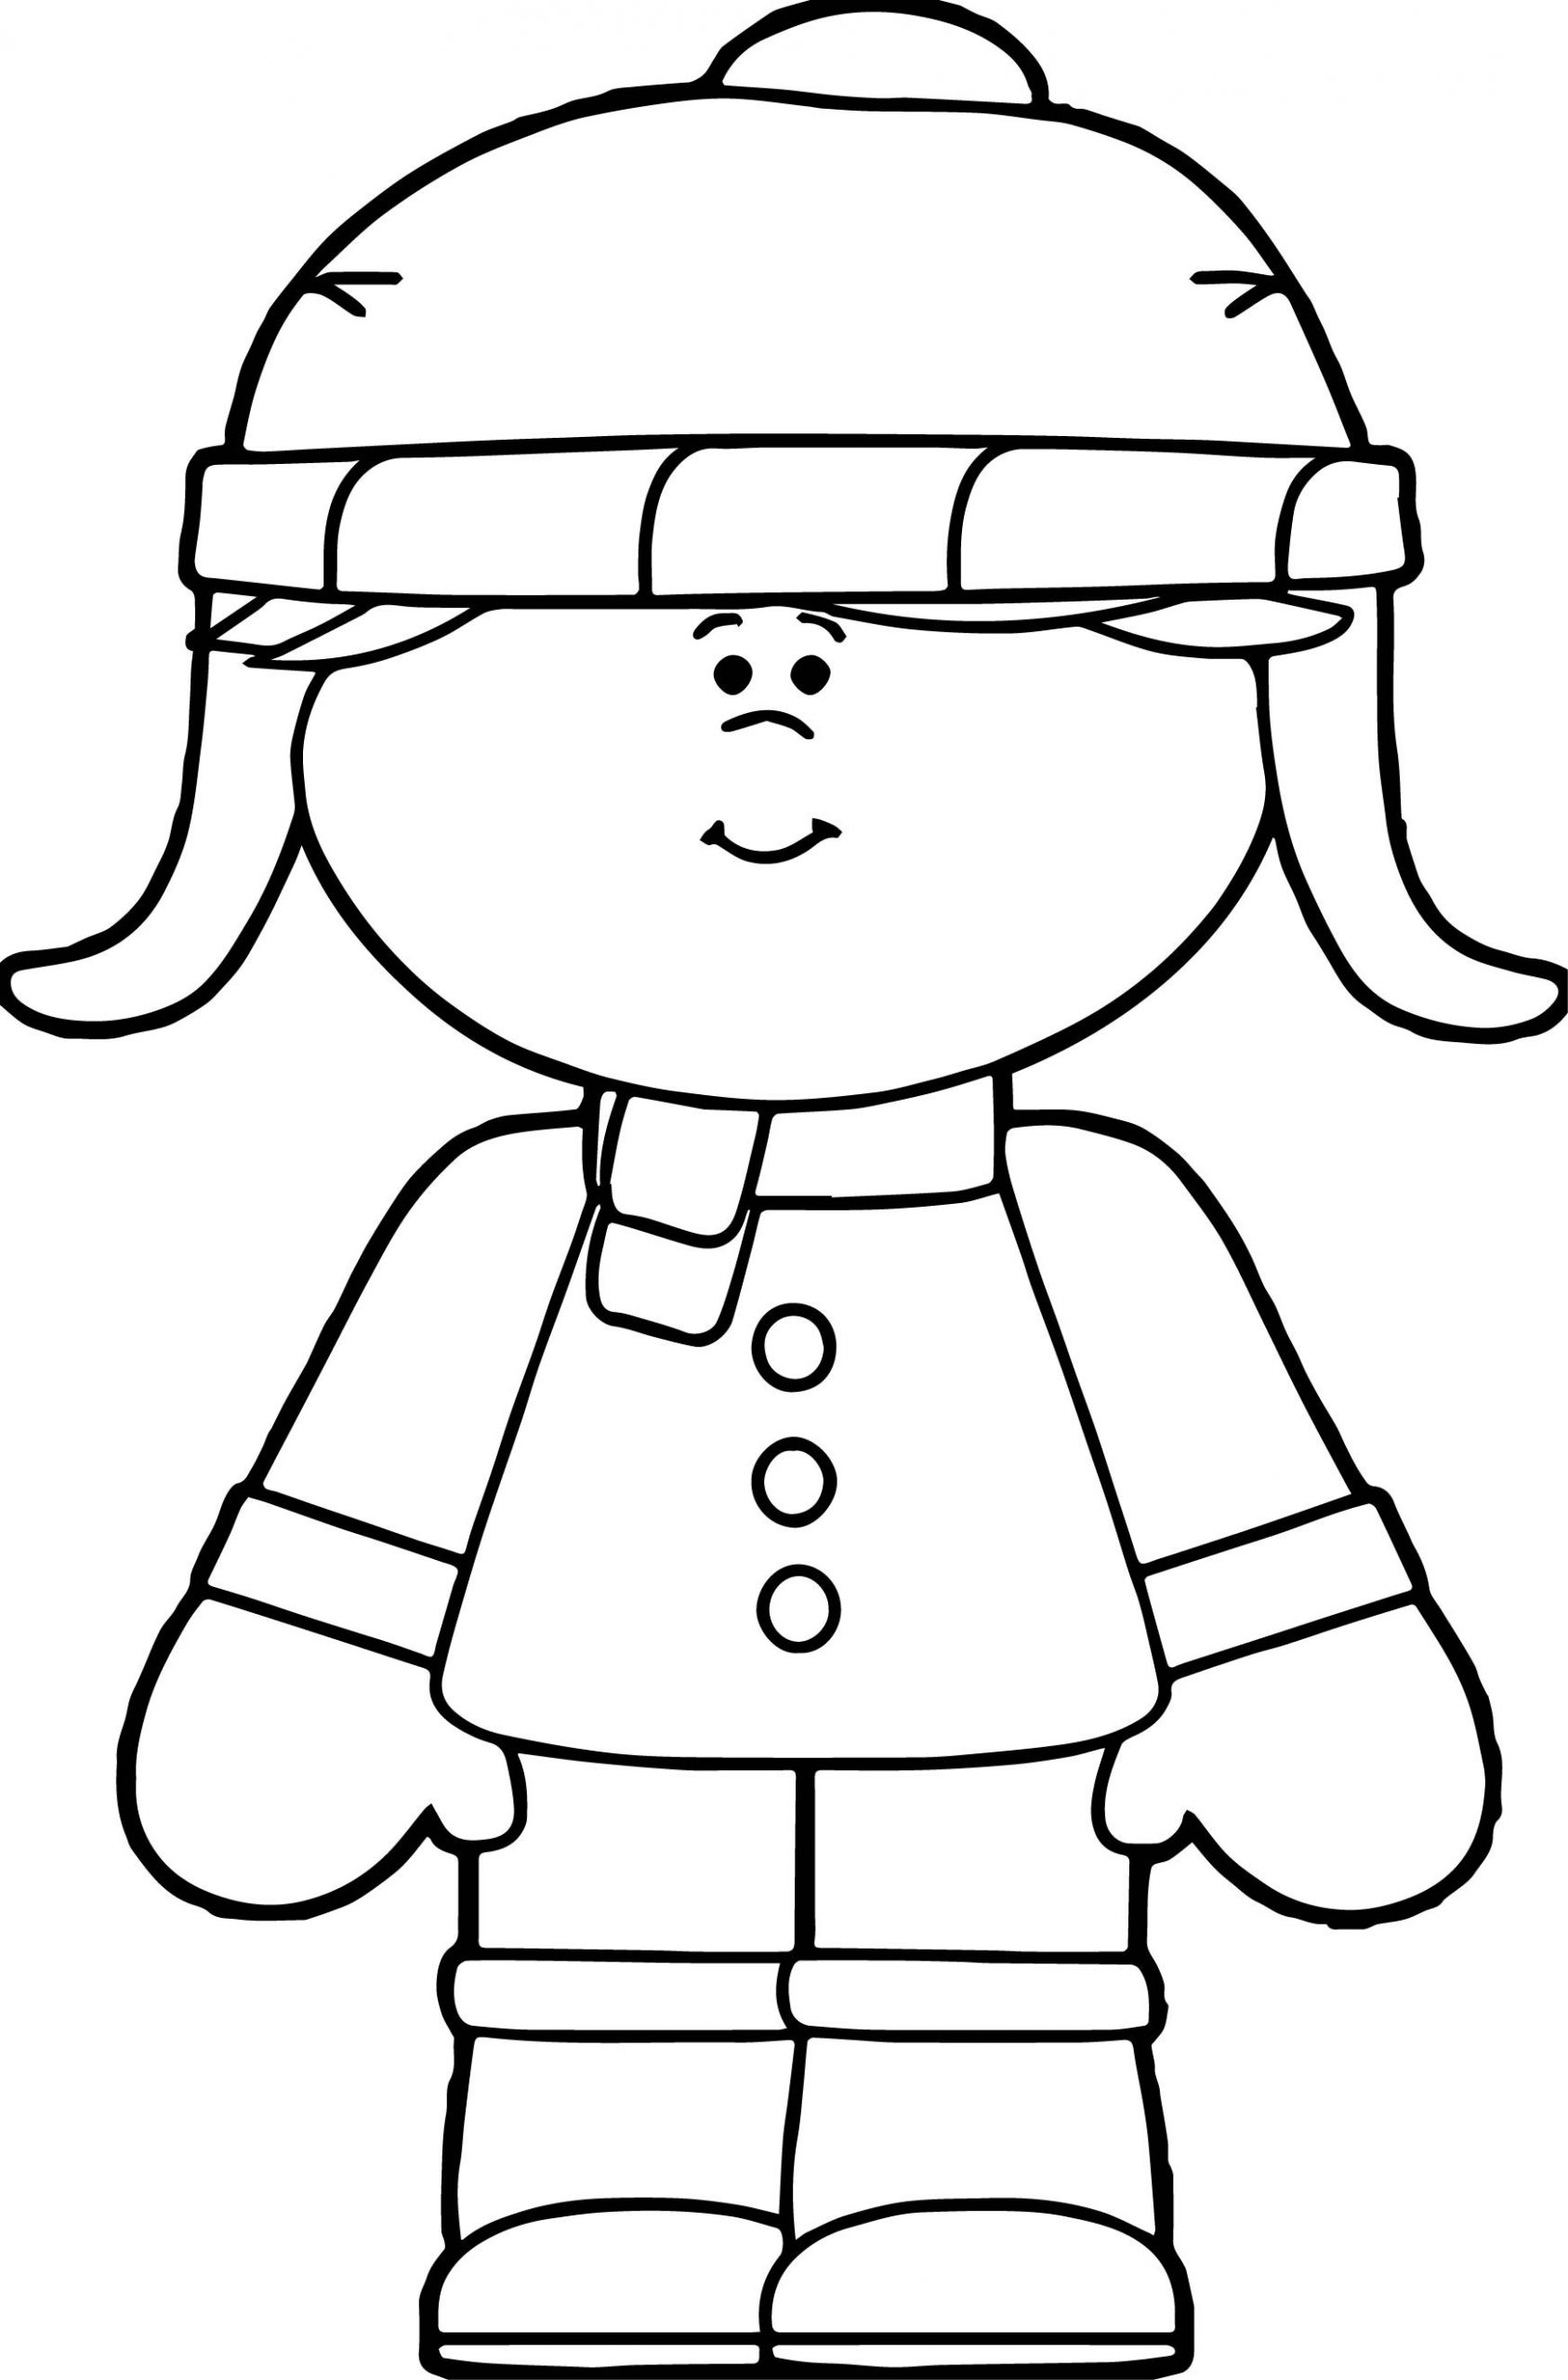 Winter Coloring Pages For Girls
 Winter Little Girl Dressed For Winter Coloring Page